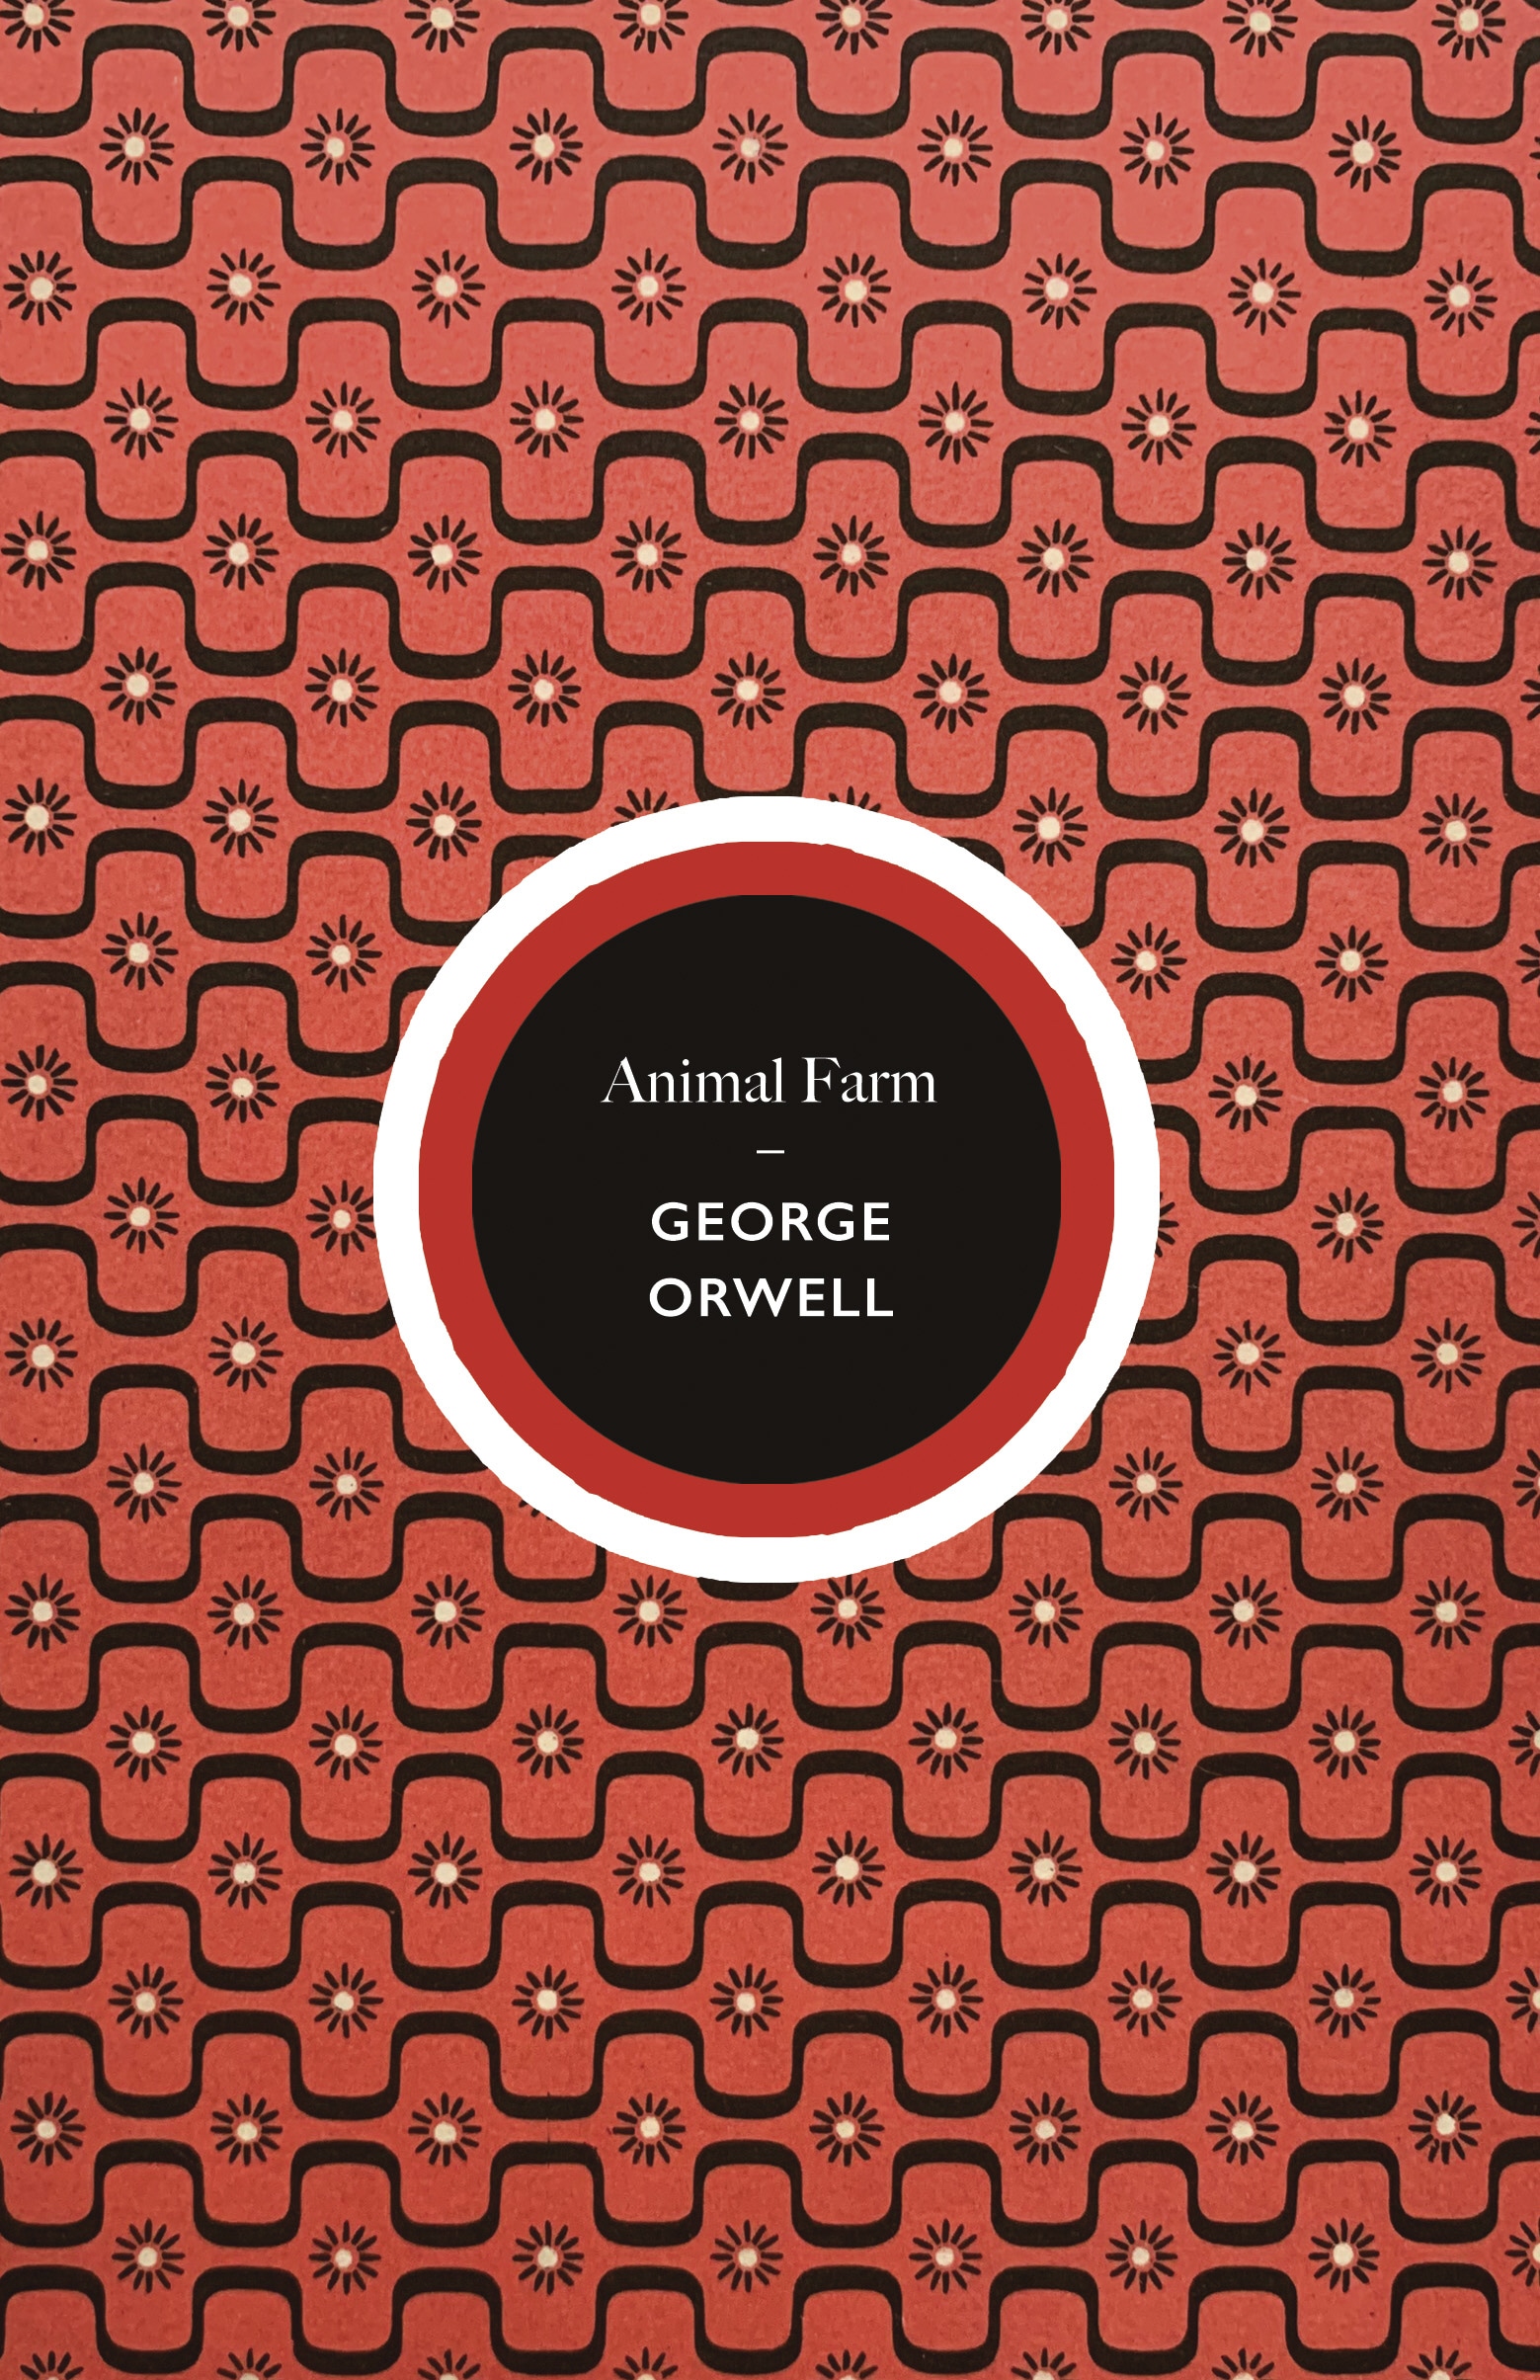 Book “Animal Farm” by George Orwell, Christopher Hitchens — August 13, 2020